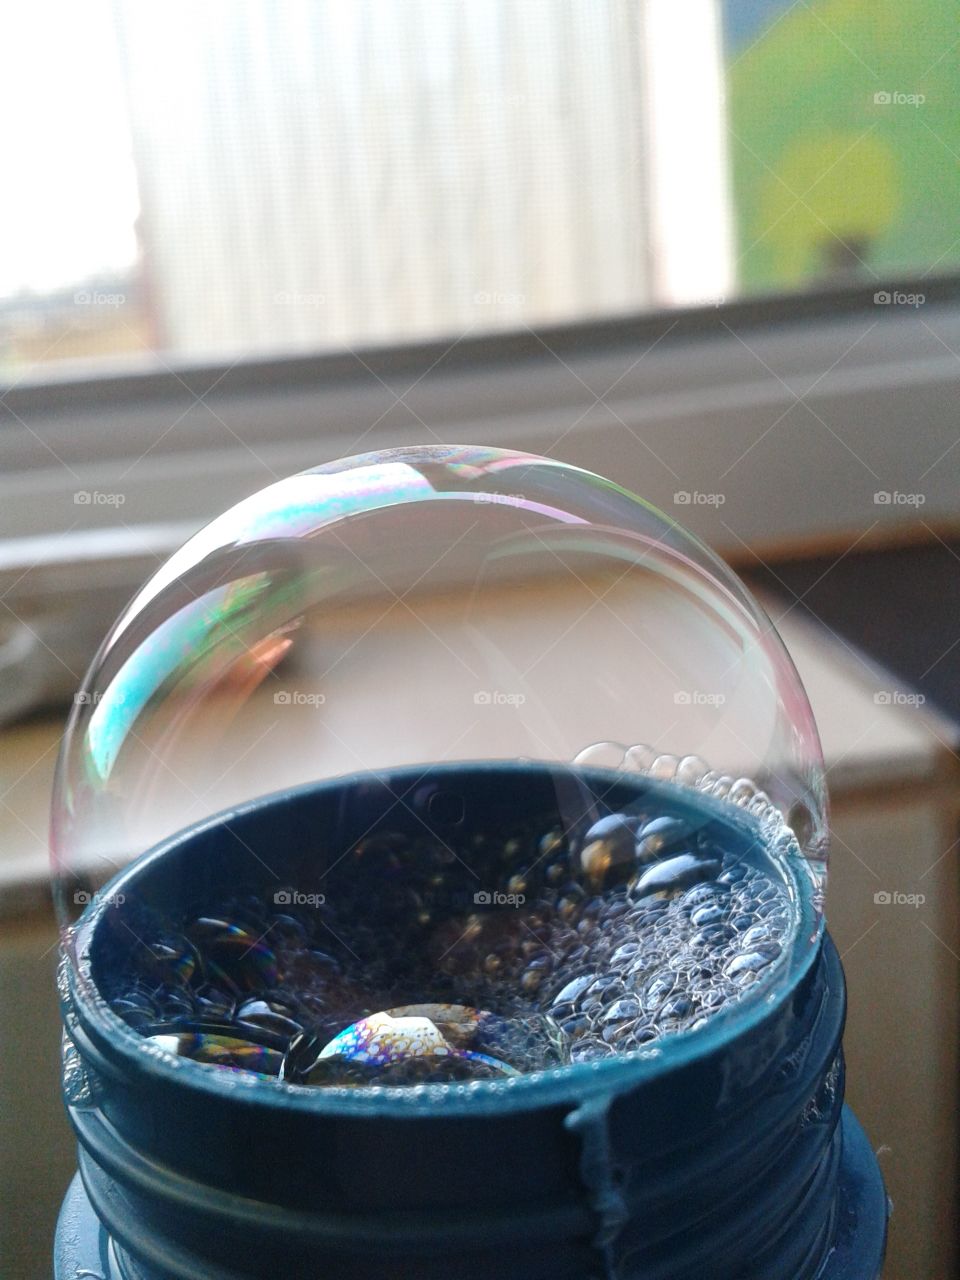 Big Bubble. My little brother was making soap bubbles and this came up.